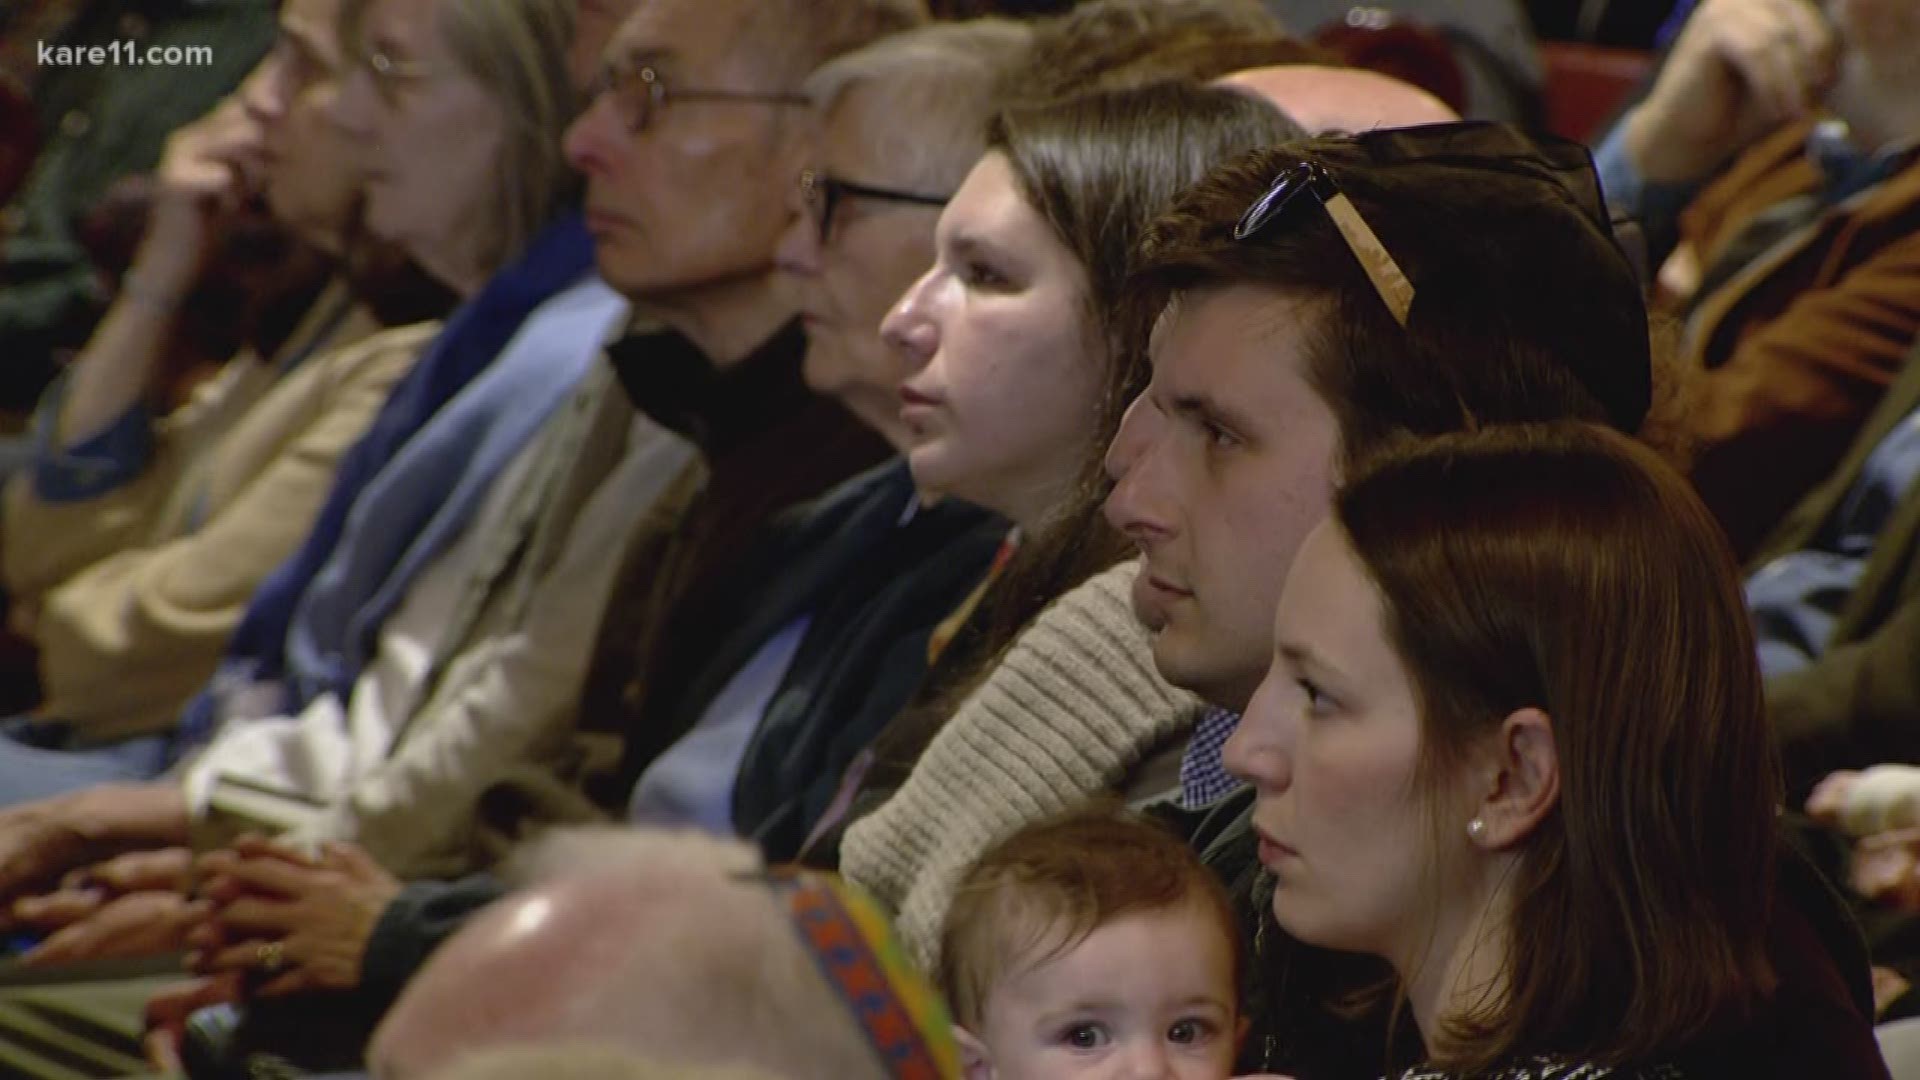 The Twin Cities Jewish community hosted a service at Temple Israel in solidarity with the Pittsburgh Jewish community.